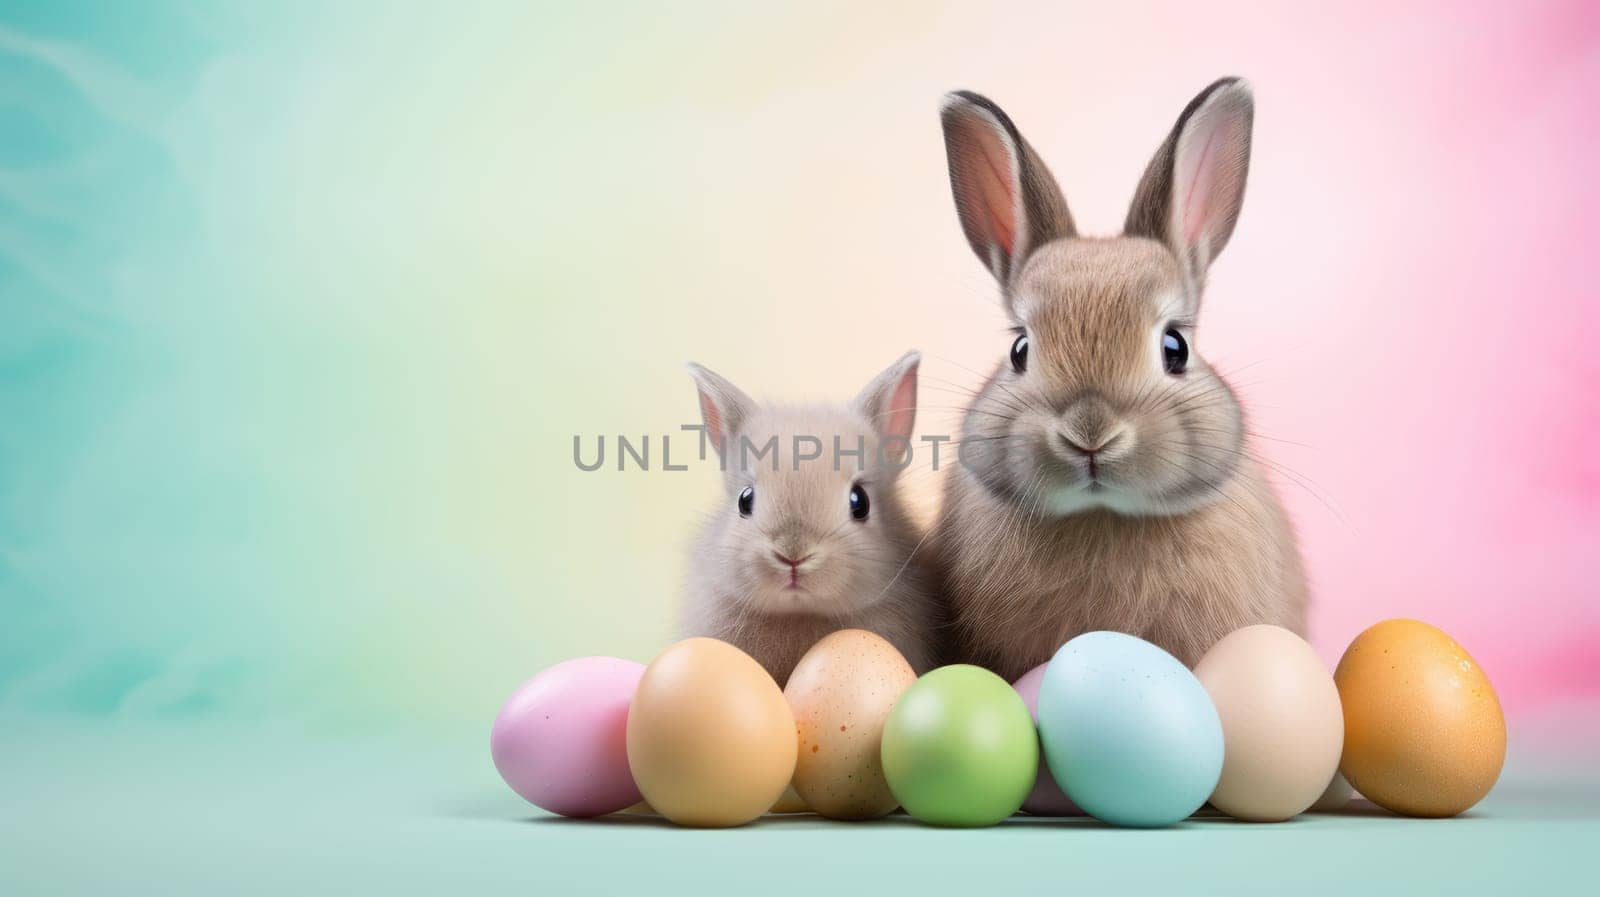 Two cute rabbits with colorful Easter eggs on blue background by JuliaDorian